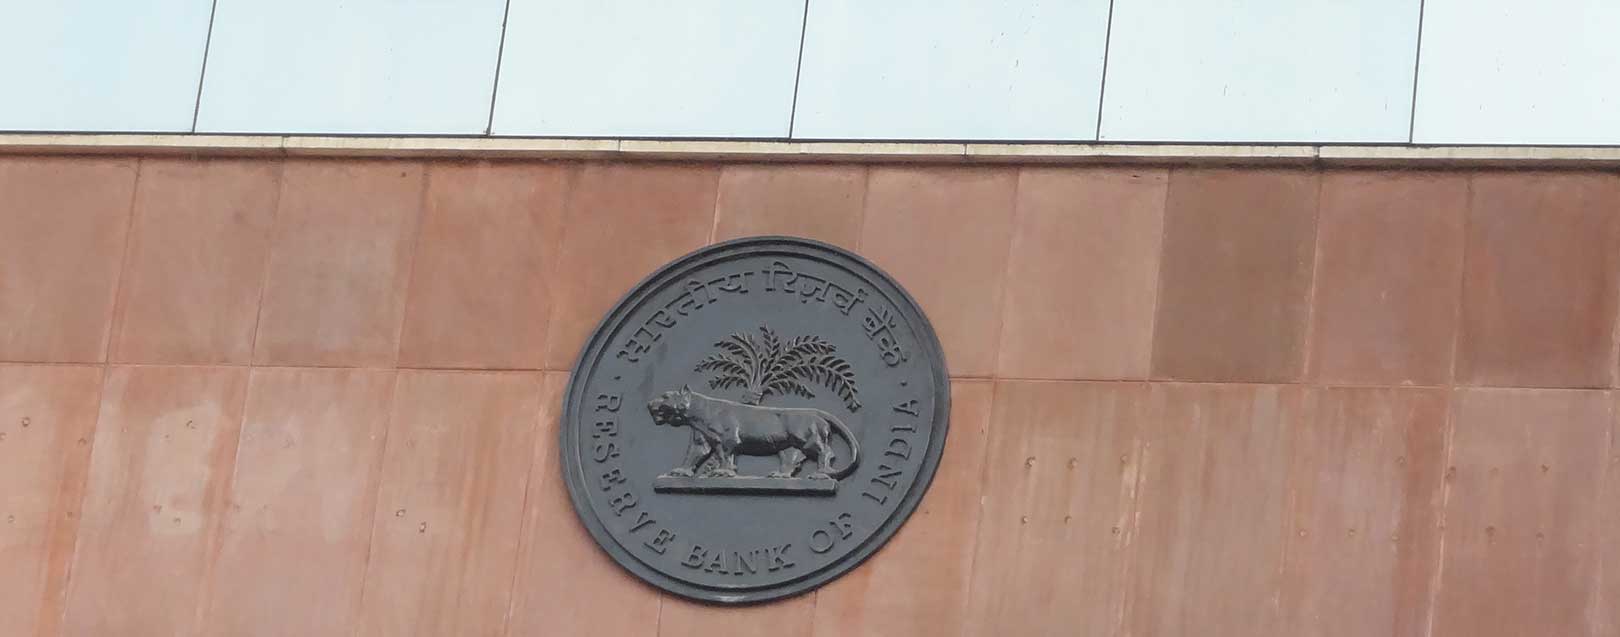 RBI may cut repo rate by 25 basis points in Feb: HSBC